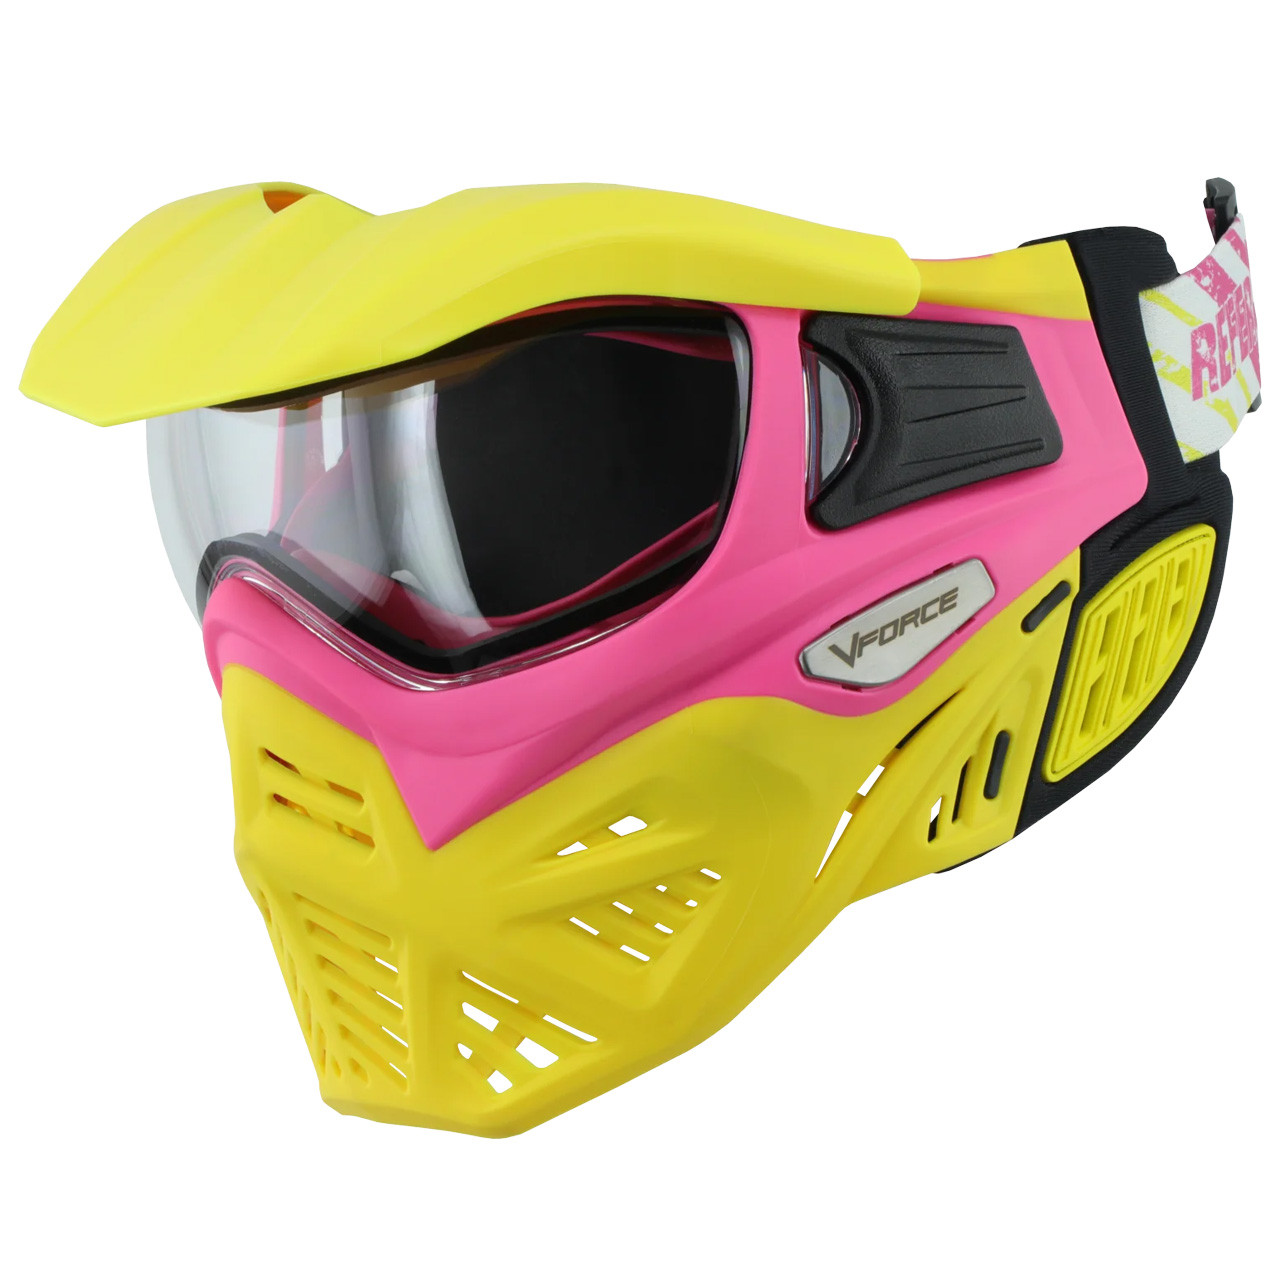 VForce Grill 2.0 Goggle - LE Referee (Yellow/Pink)